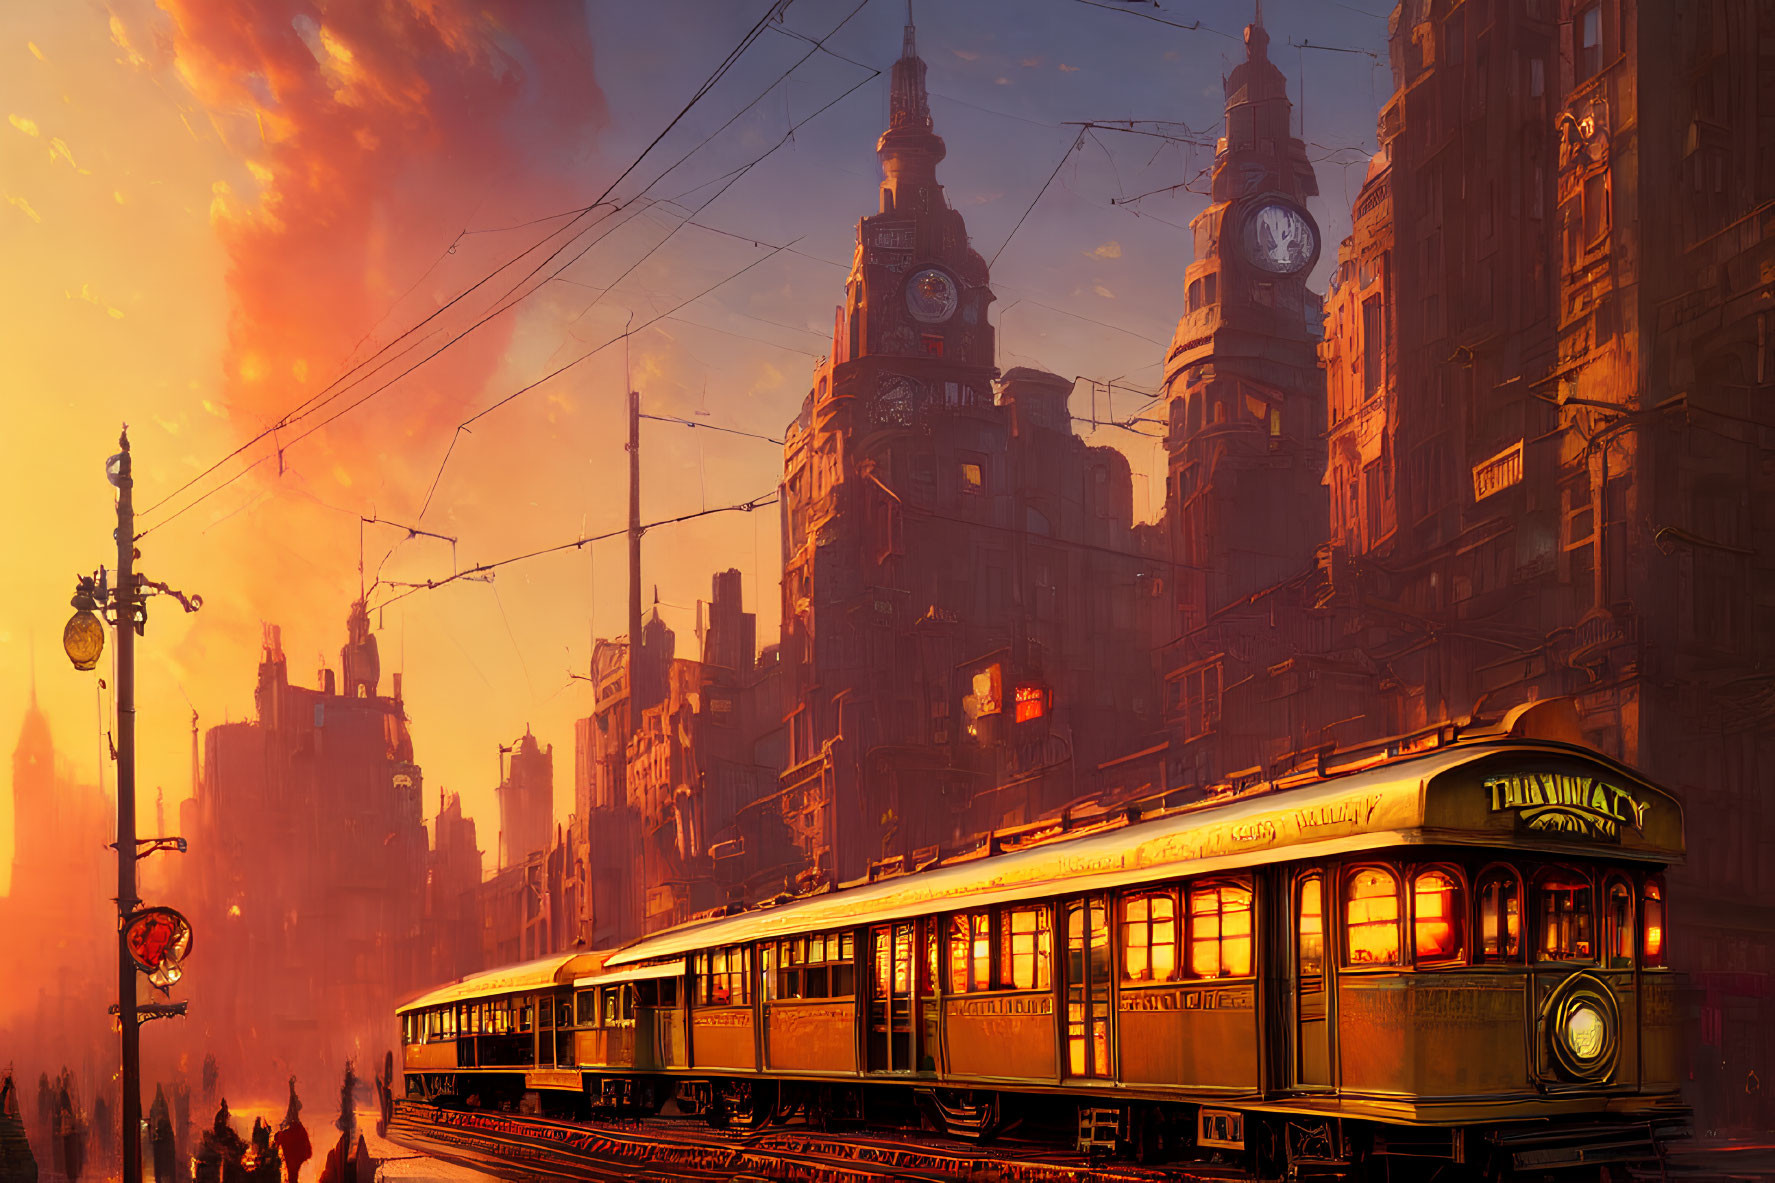 Vintage tram in bustling city with ornate buildings at sunset